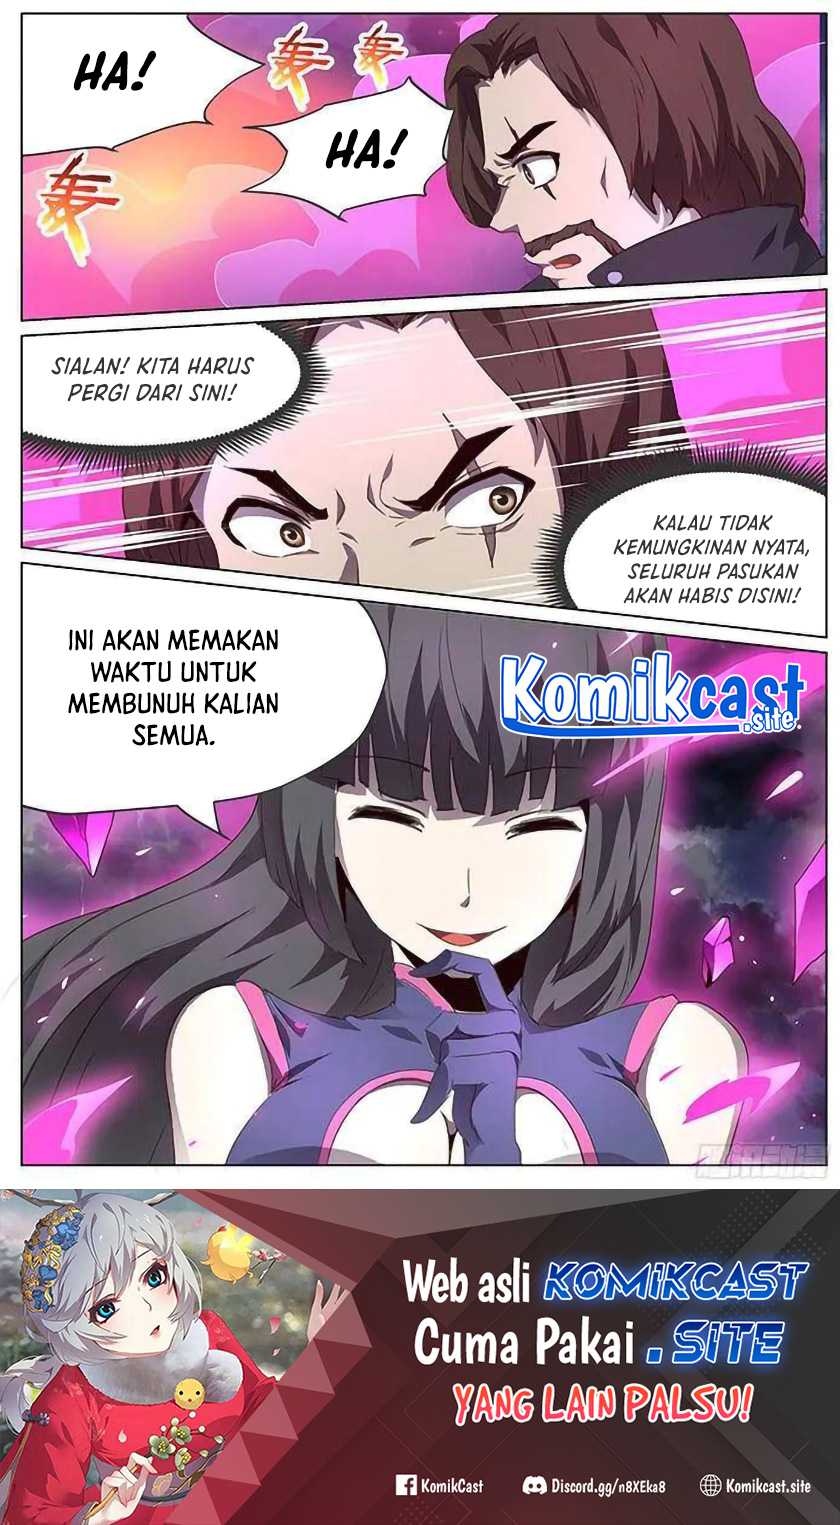 Girl and Science Chapter 92